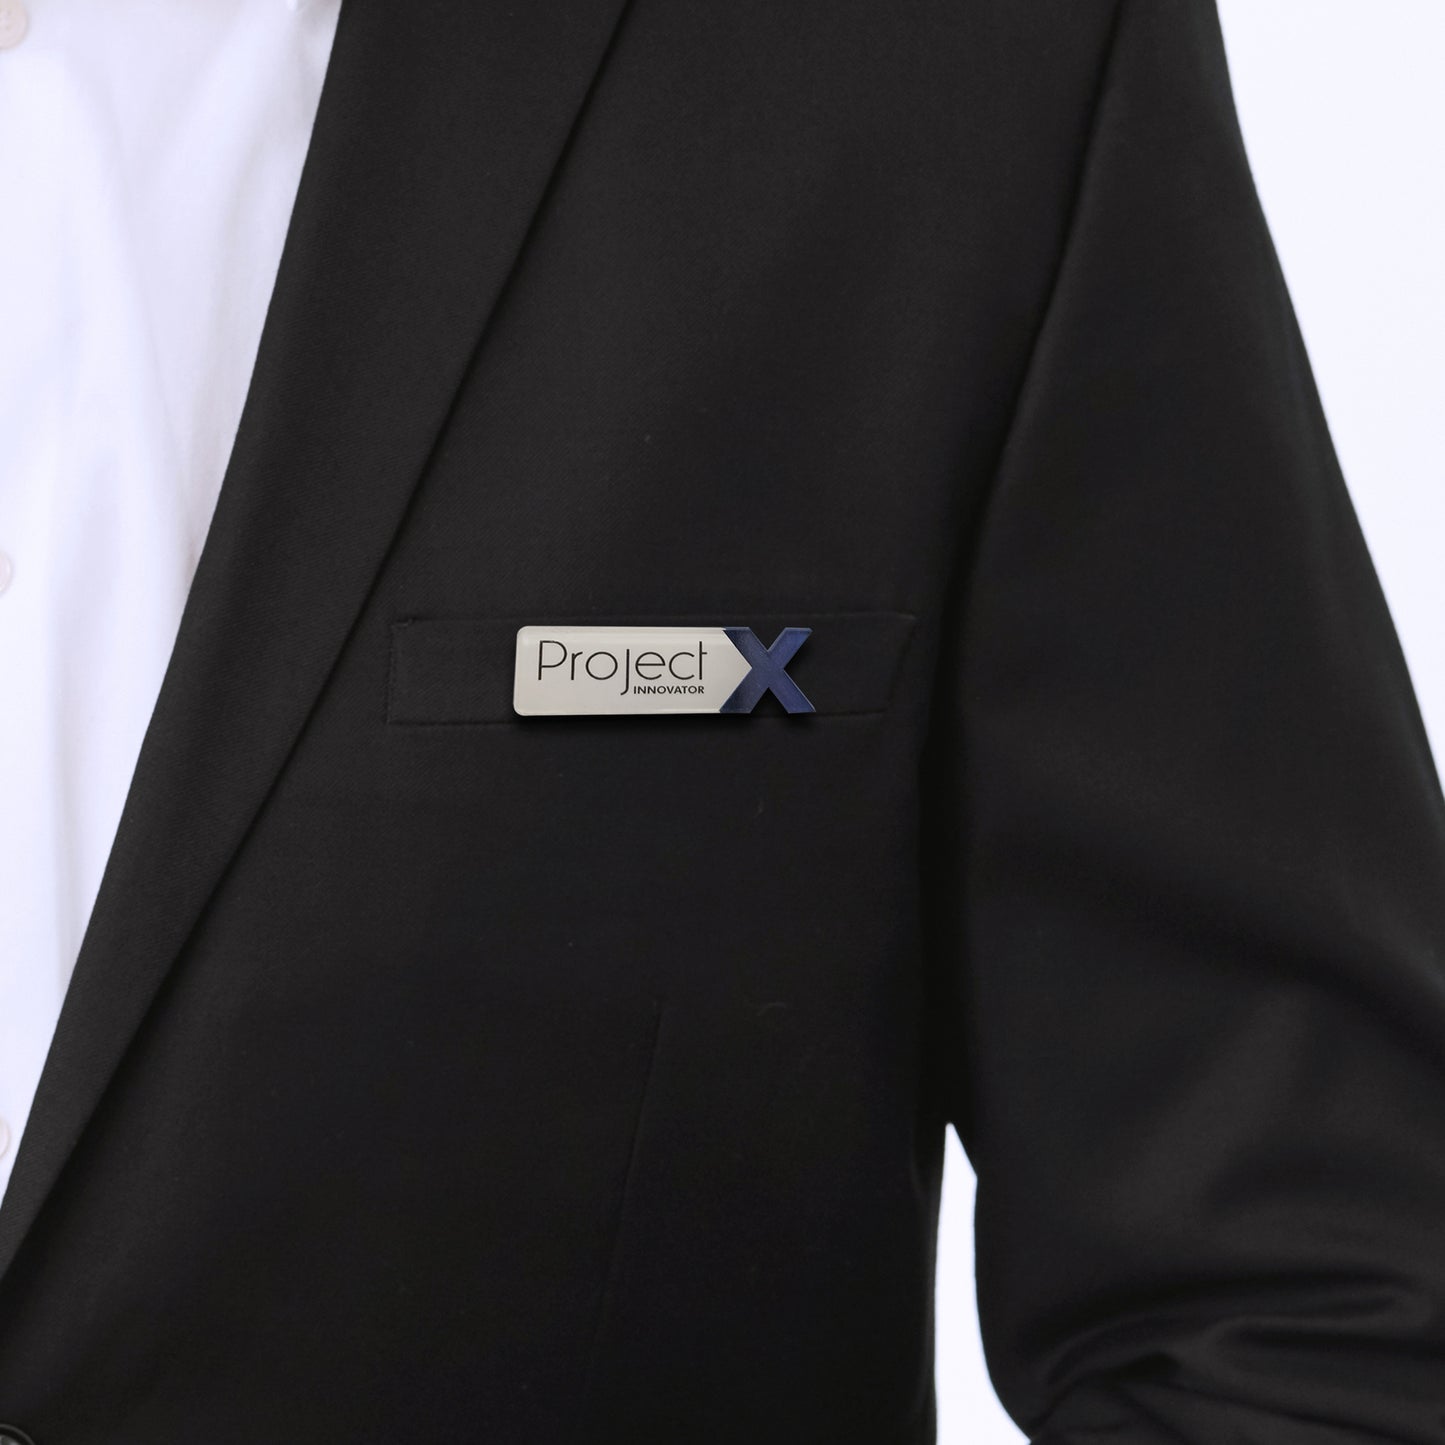 Customized Name Badge For Corporate Employees